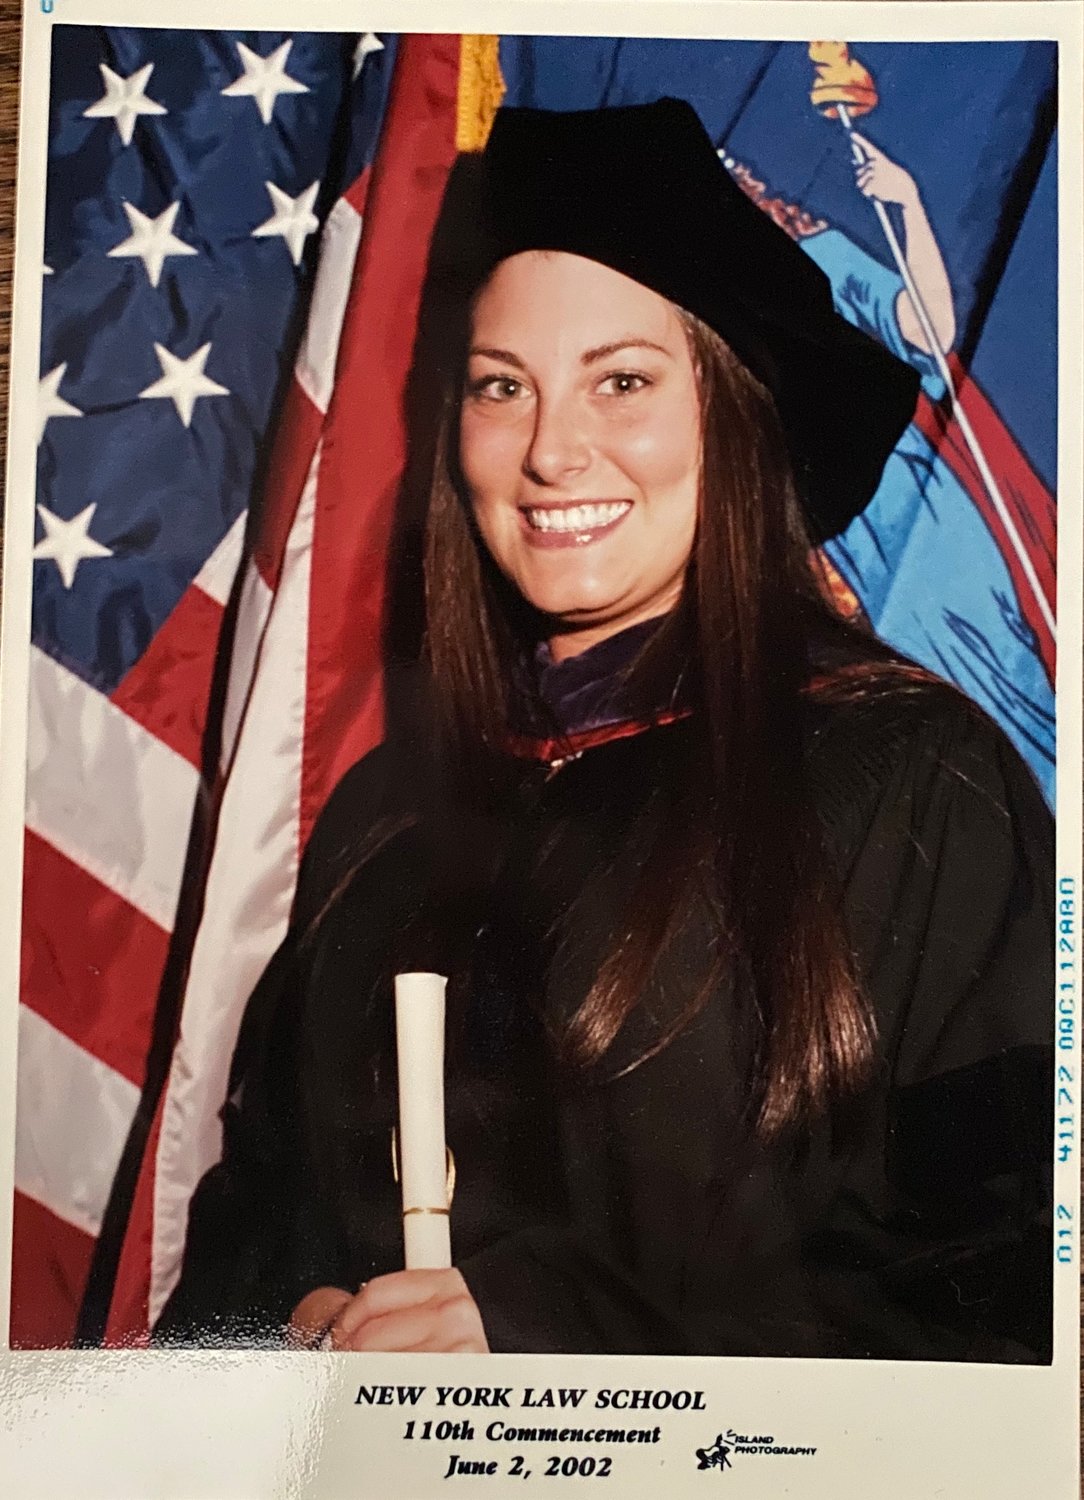 Sara Director, a Barasch McGarry Salzman & Penson partner from Locust Valley, graduated from New York Law School in Lower Manhattan in 2002. Director, along with her classmates, witnessed the attacks.